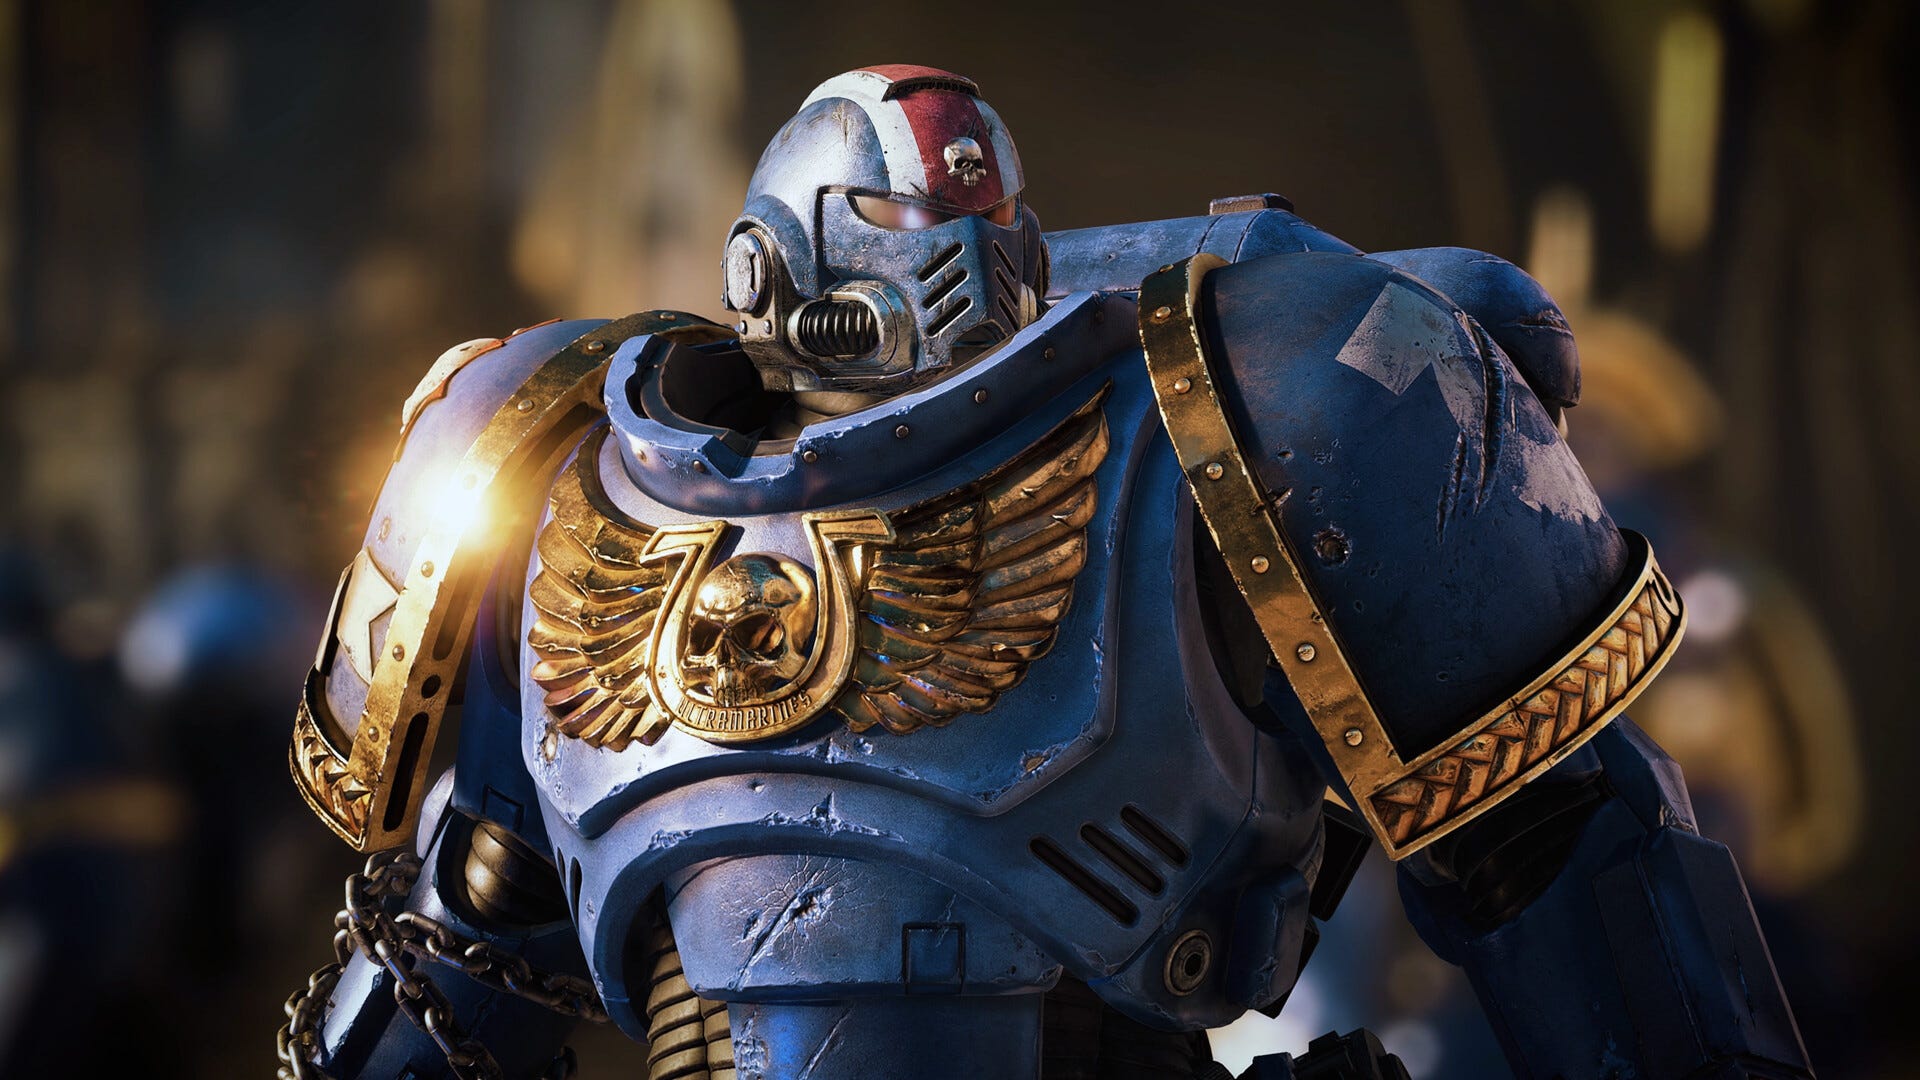 Warhammer 40K: Space Marine 2 will include a PvP mode according to this art book leak